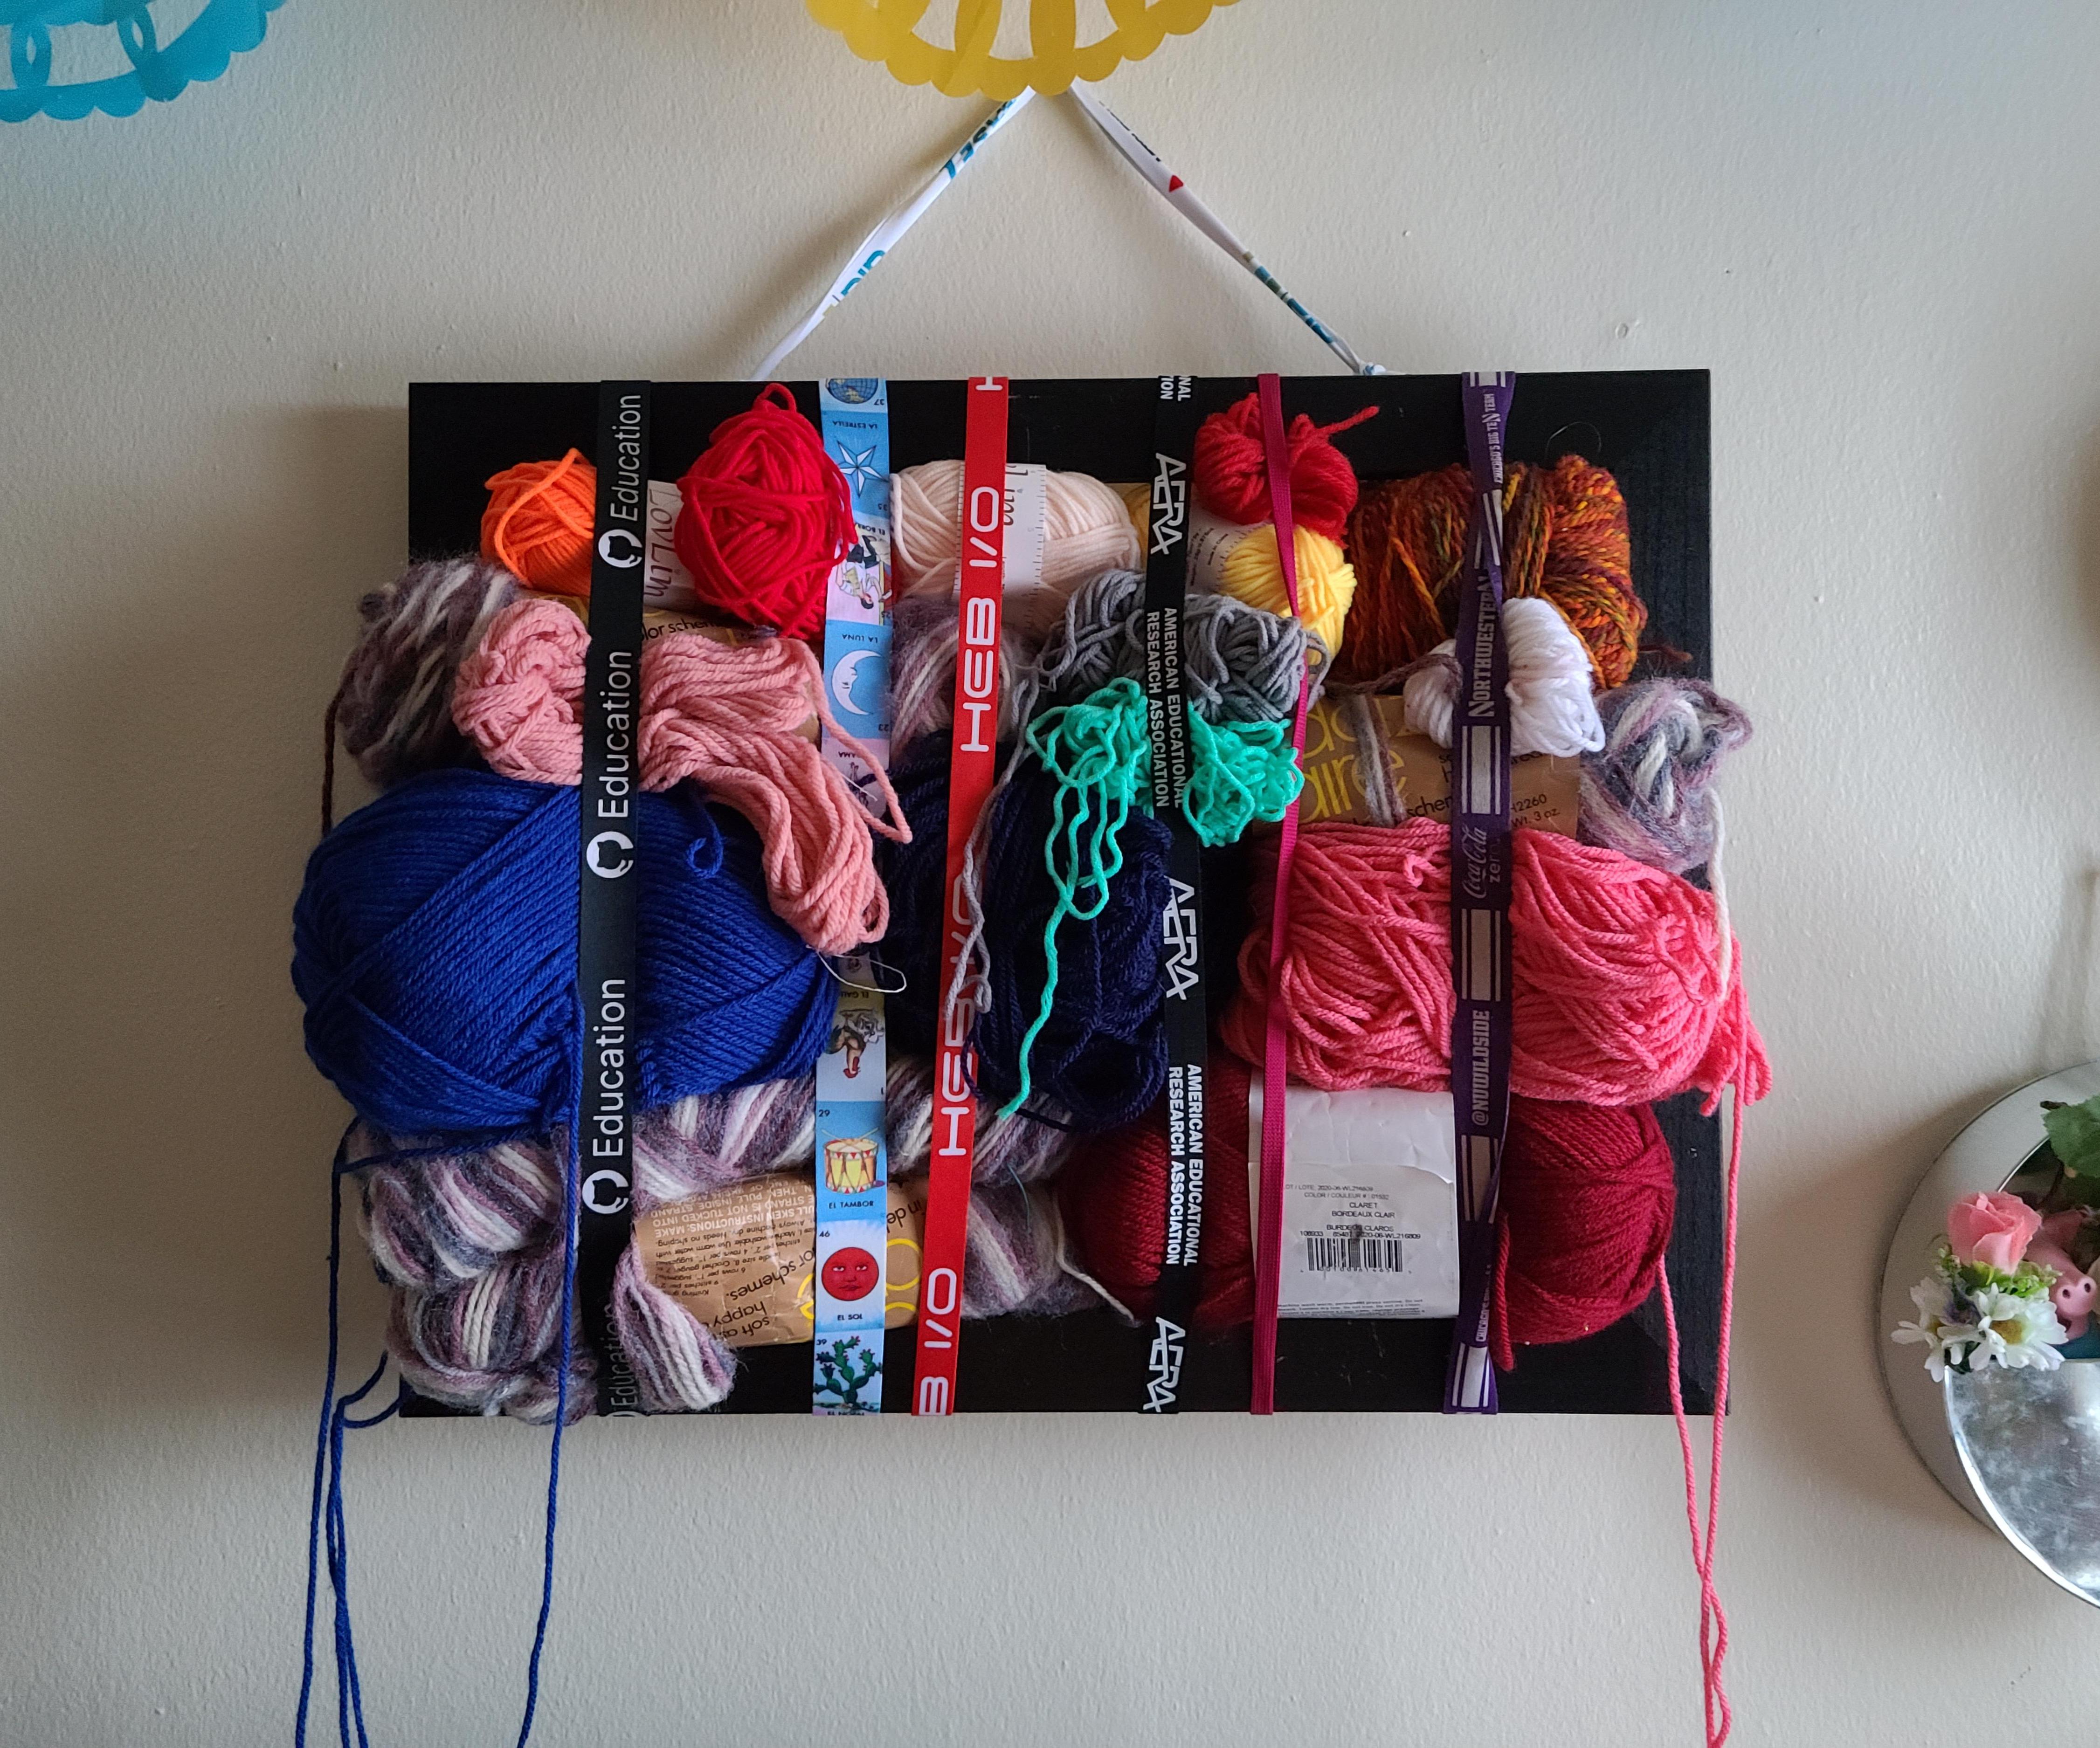 Turn a Frame Into a Hanging Wall Organizer!